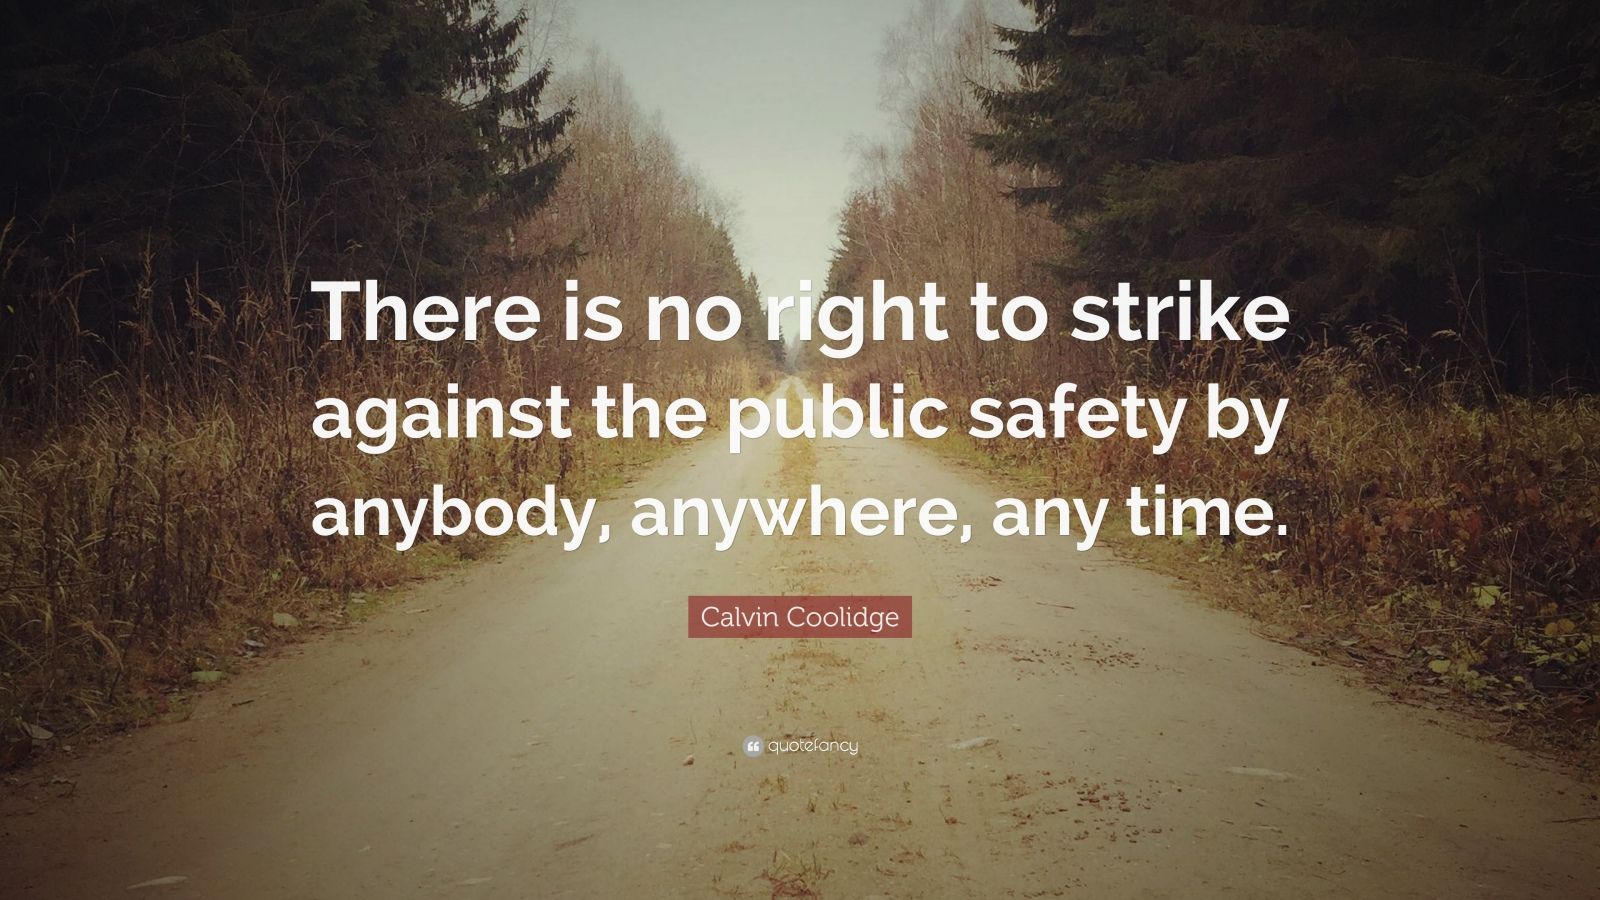 Calvin Coolidge Quote: “There is no right to strike against the public